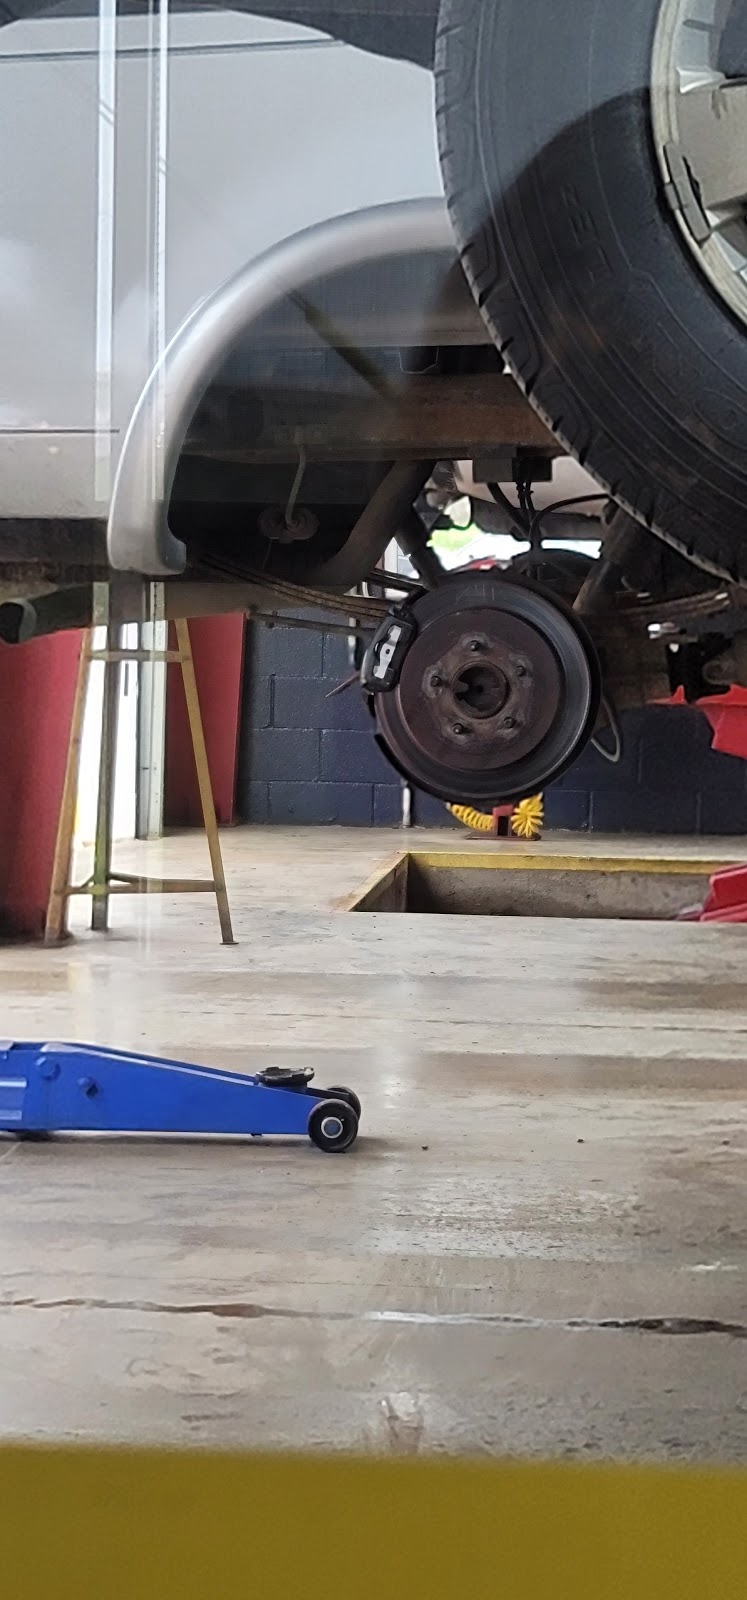 Brake Check | 1970 Country Pl Pkwy, Pearland, TX 77584 | Phone: (713) 436-6480